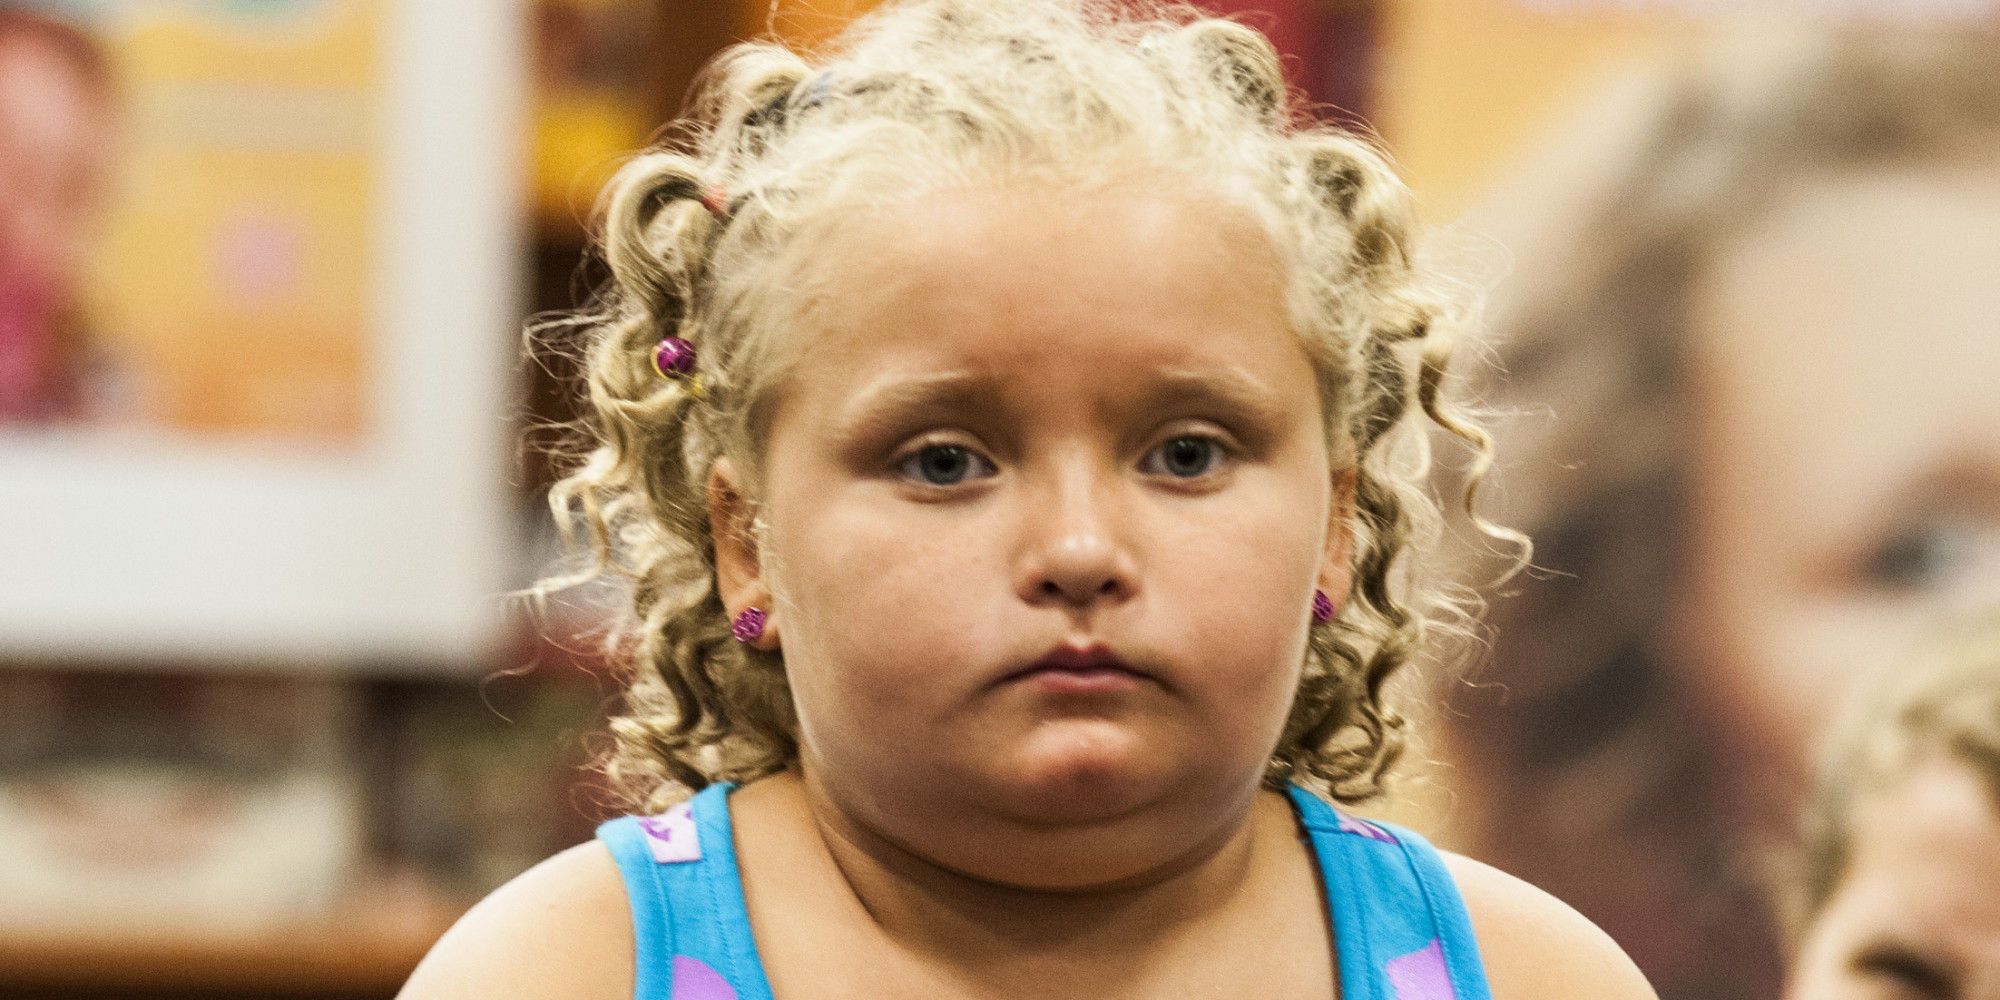 15 Things You Never Knew About Honey Boo Boos Family